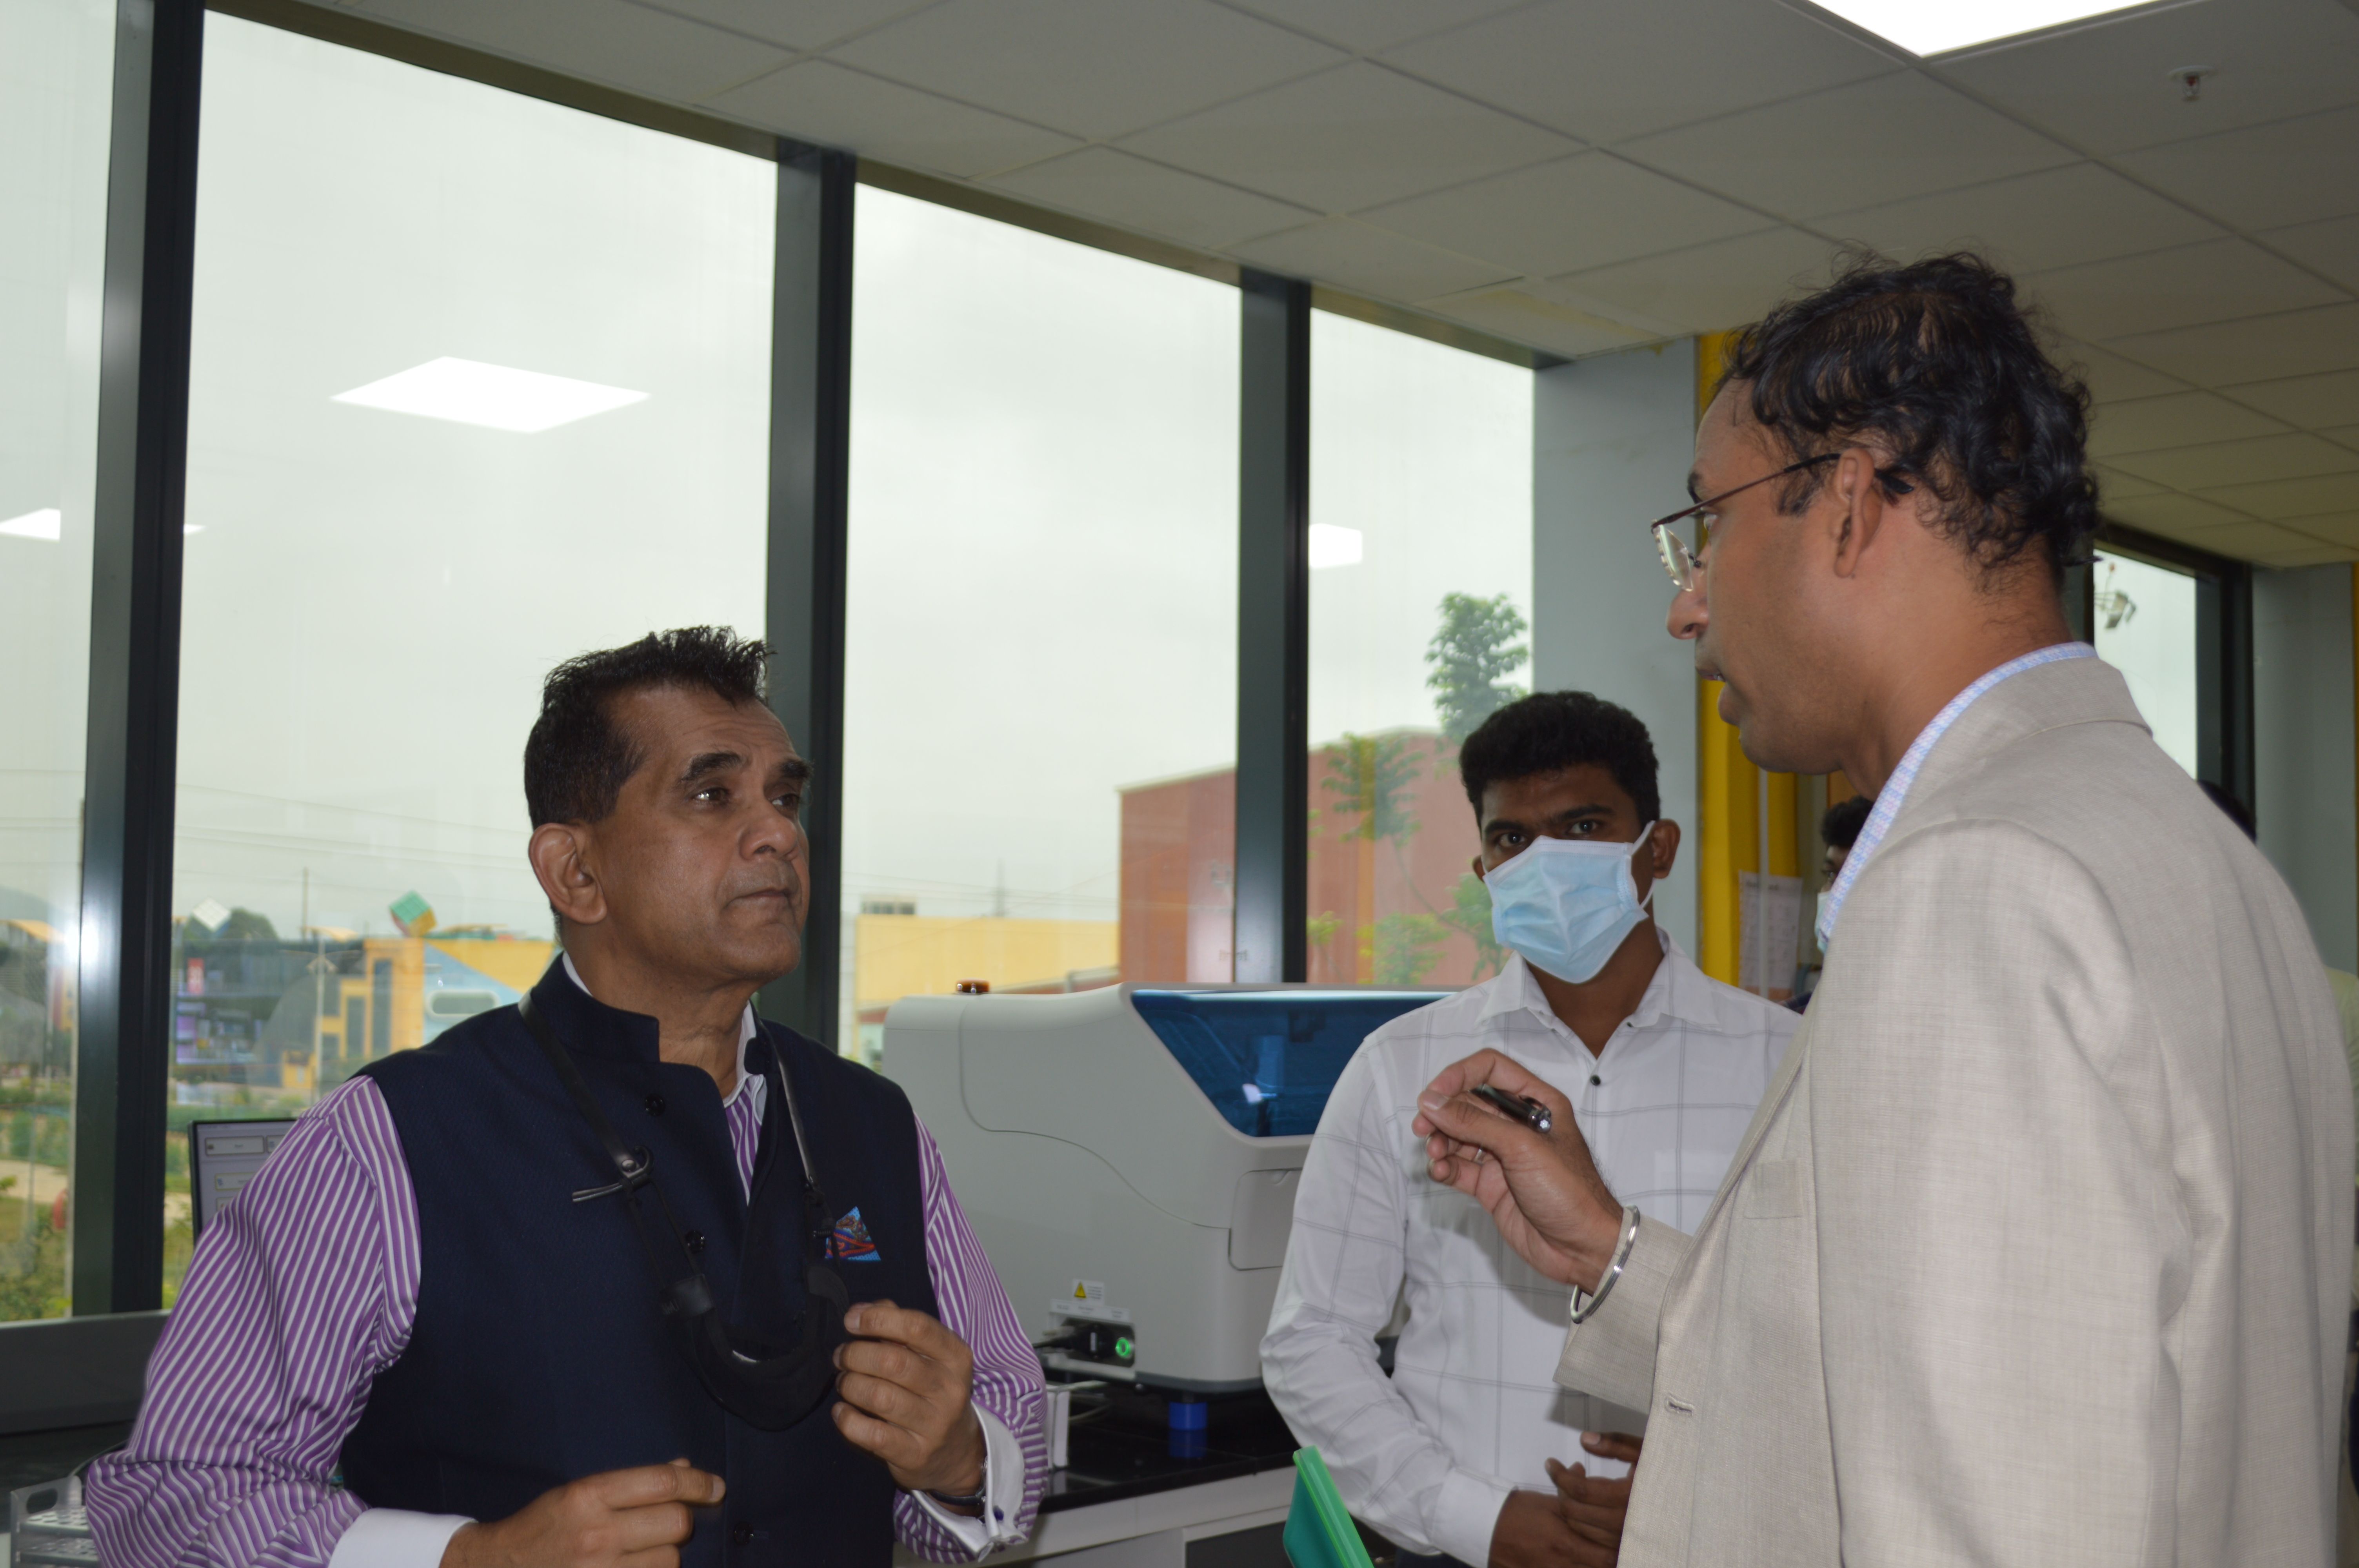 Dr. Jitendra Sharma meets with Mr. Amitabh Kant, former CEO of Niti Aayog, to discuss AMTZ Medical Care and Health Care Technology in India